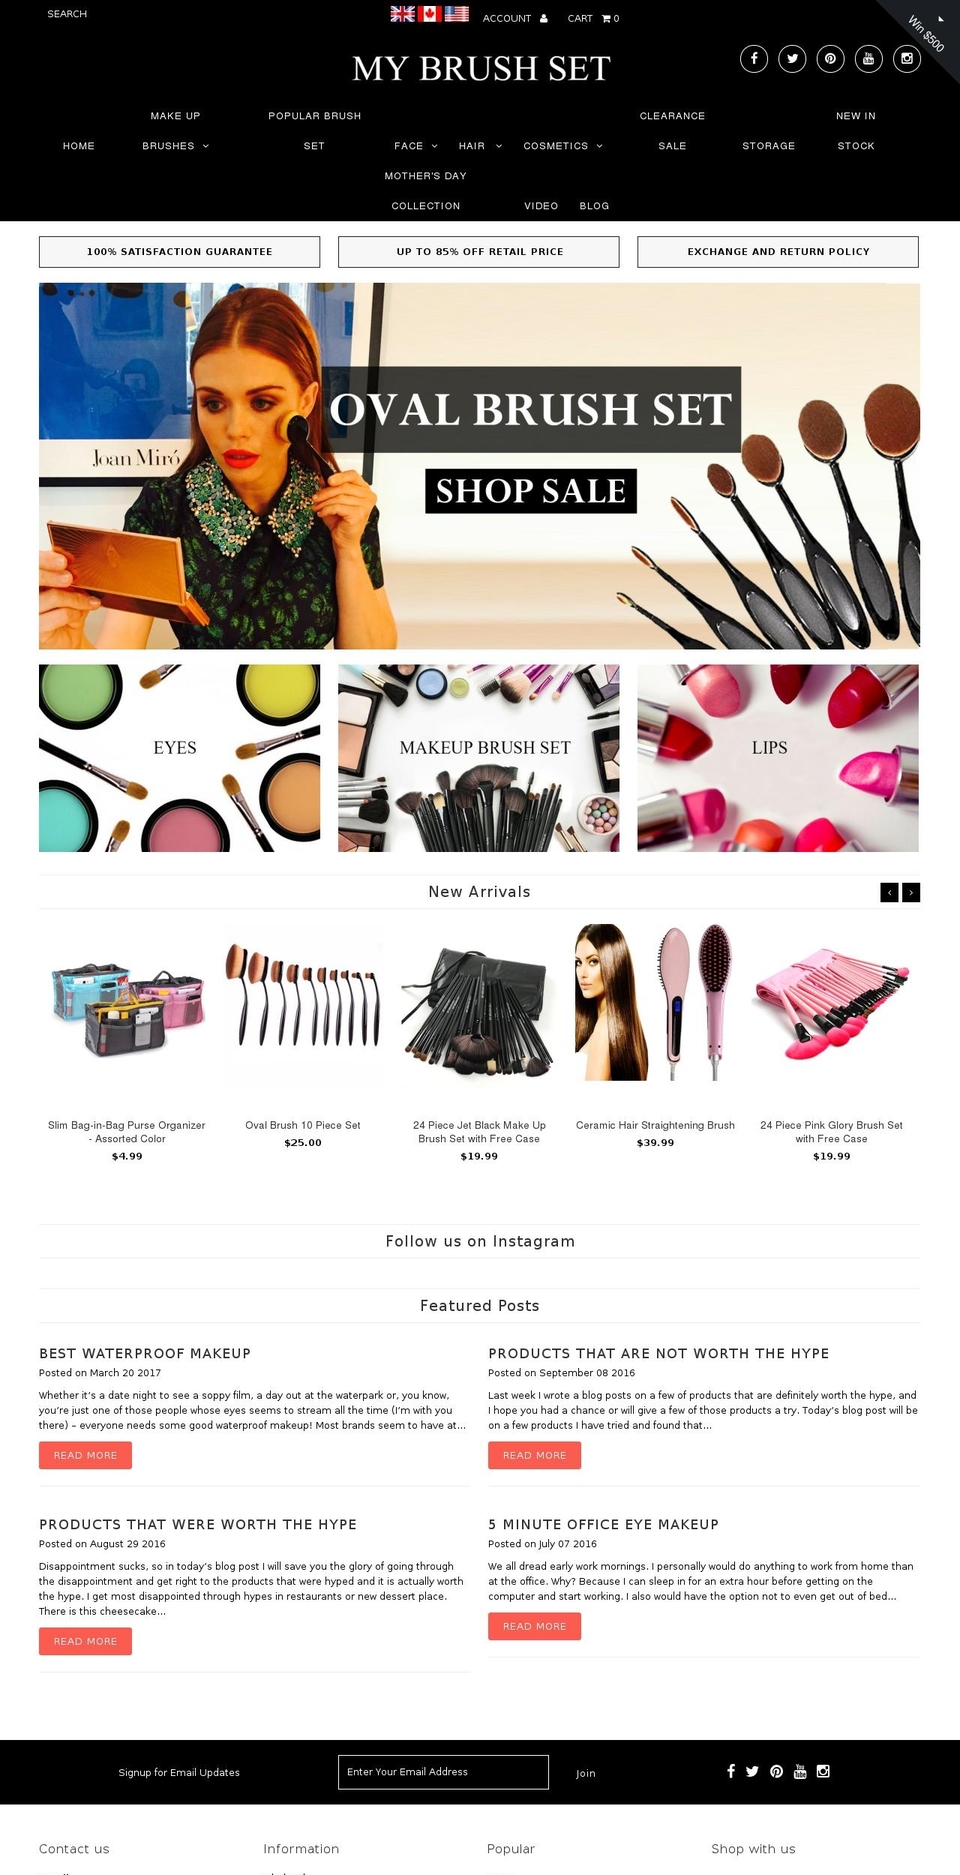 Capital Shopify theme site example mymakeupbrushset.com